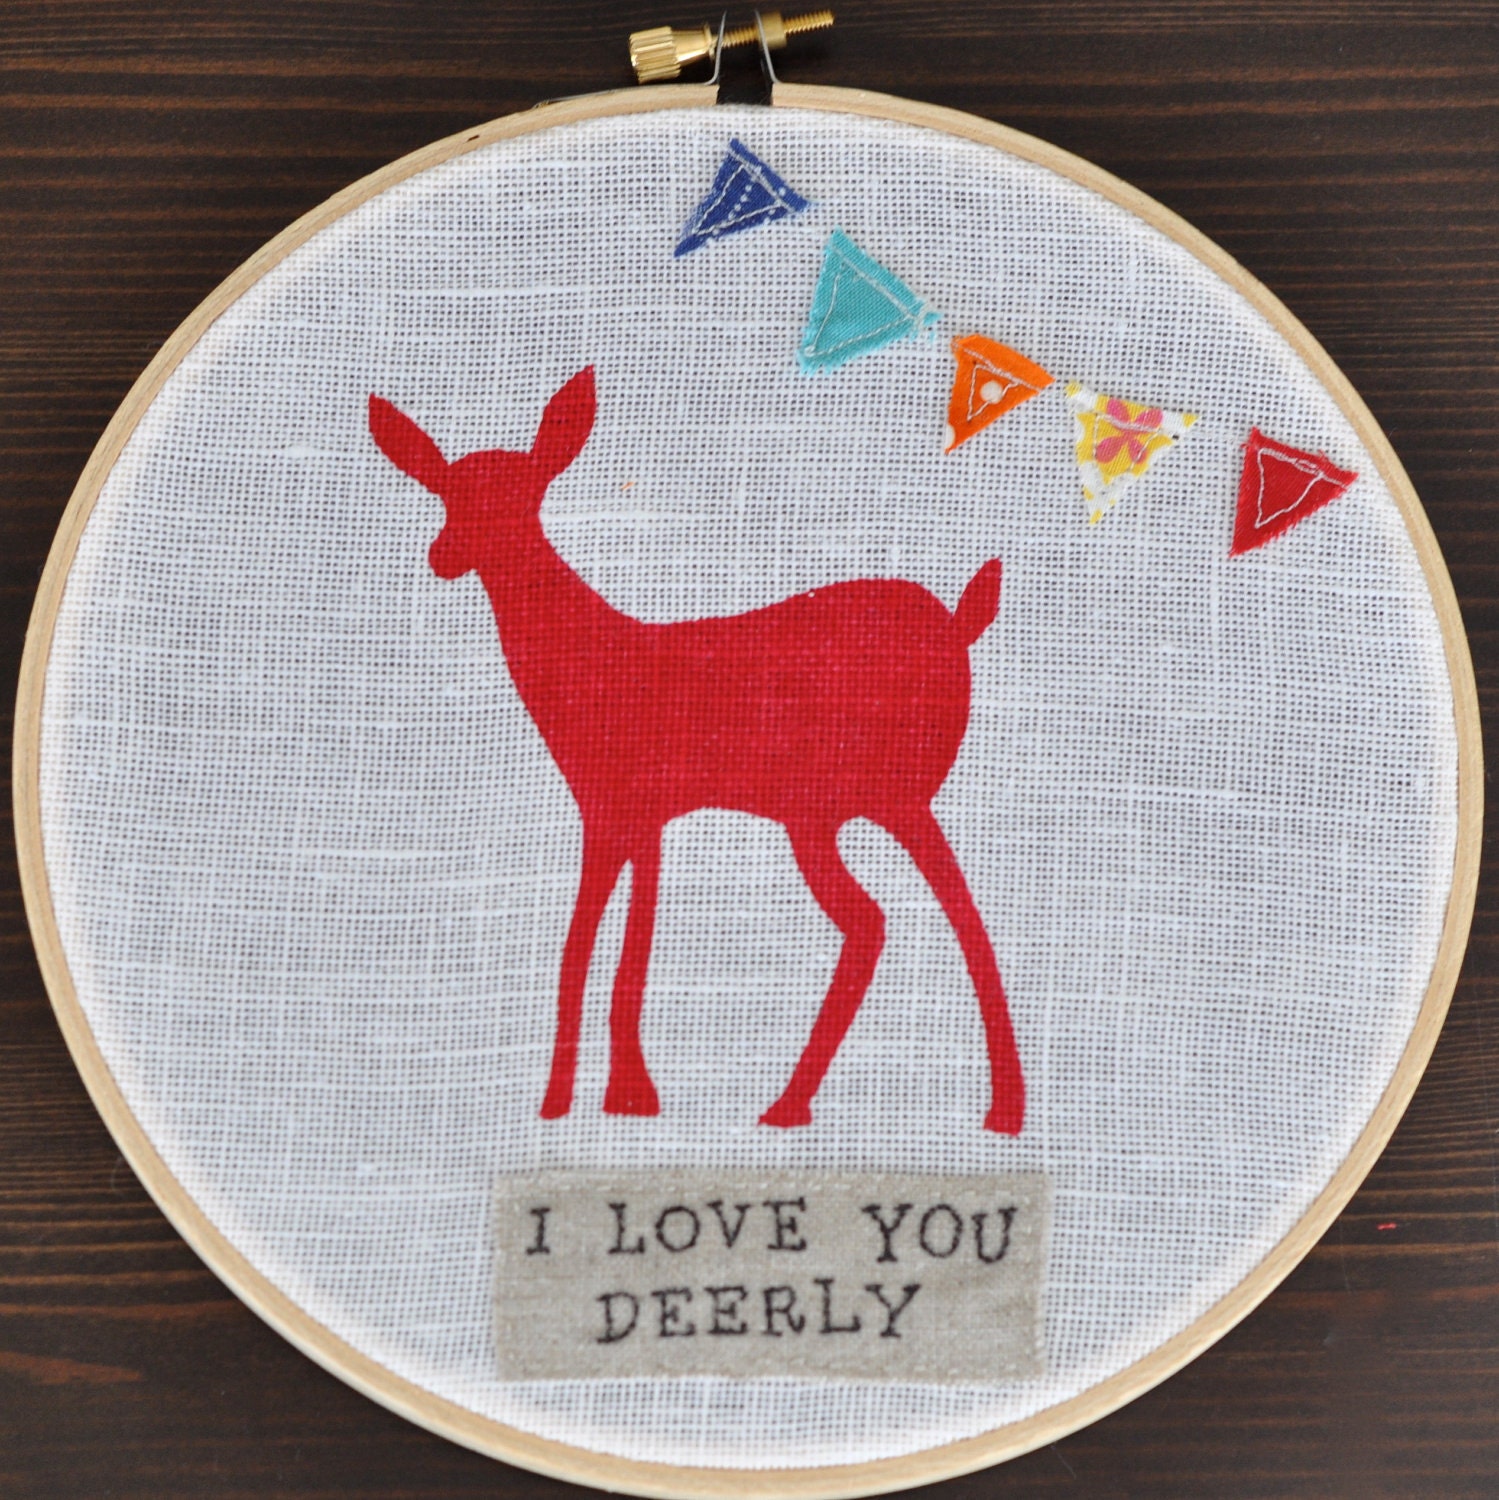 I Love You Deerly Embroidery Hoop